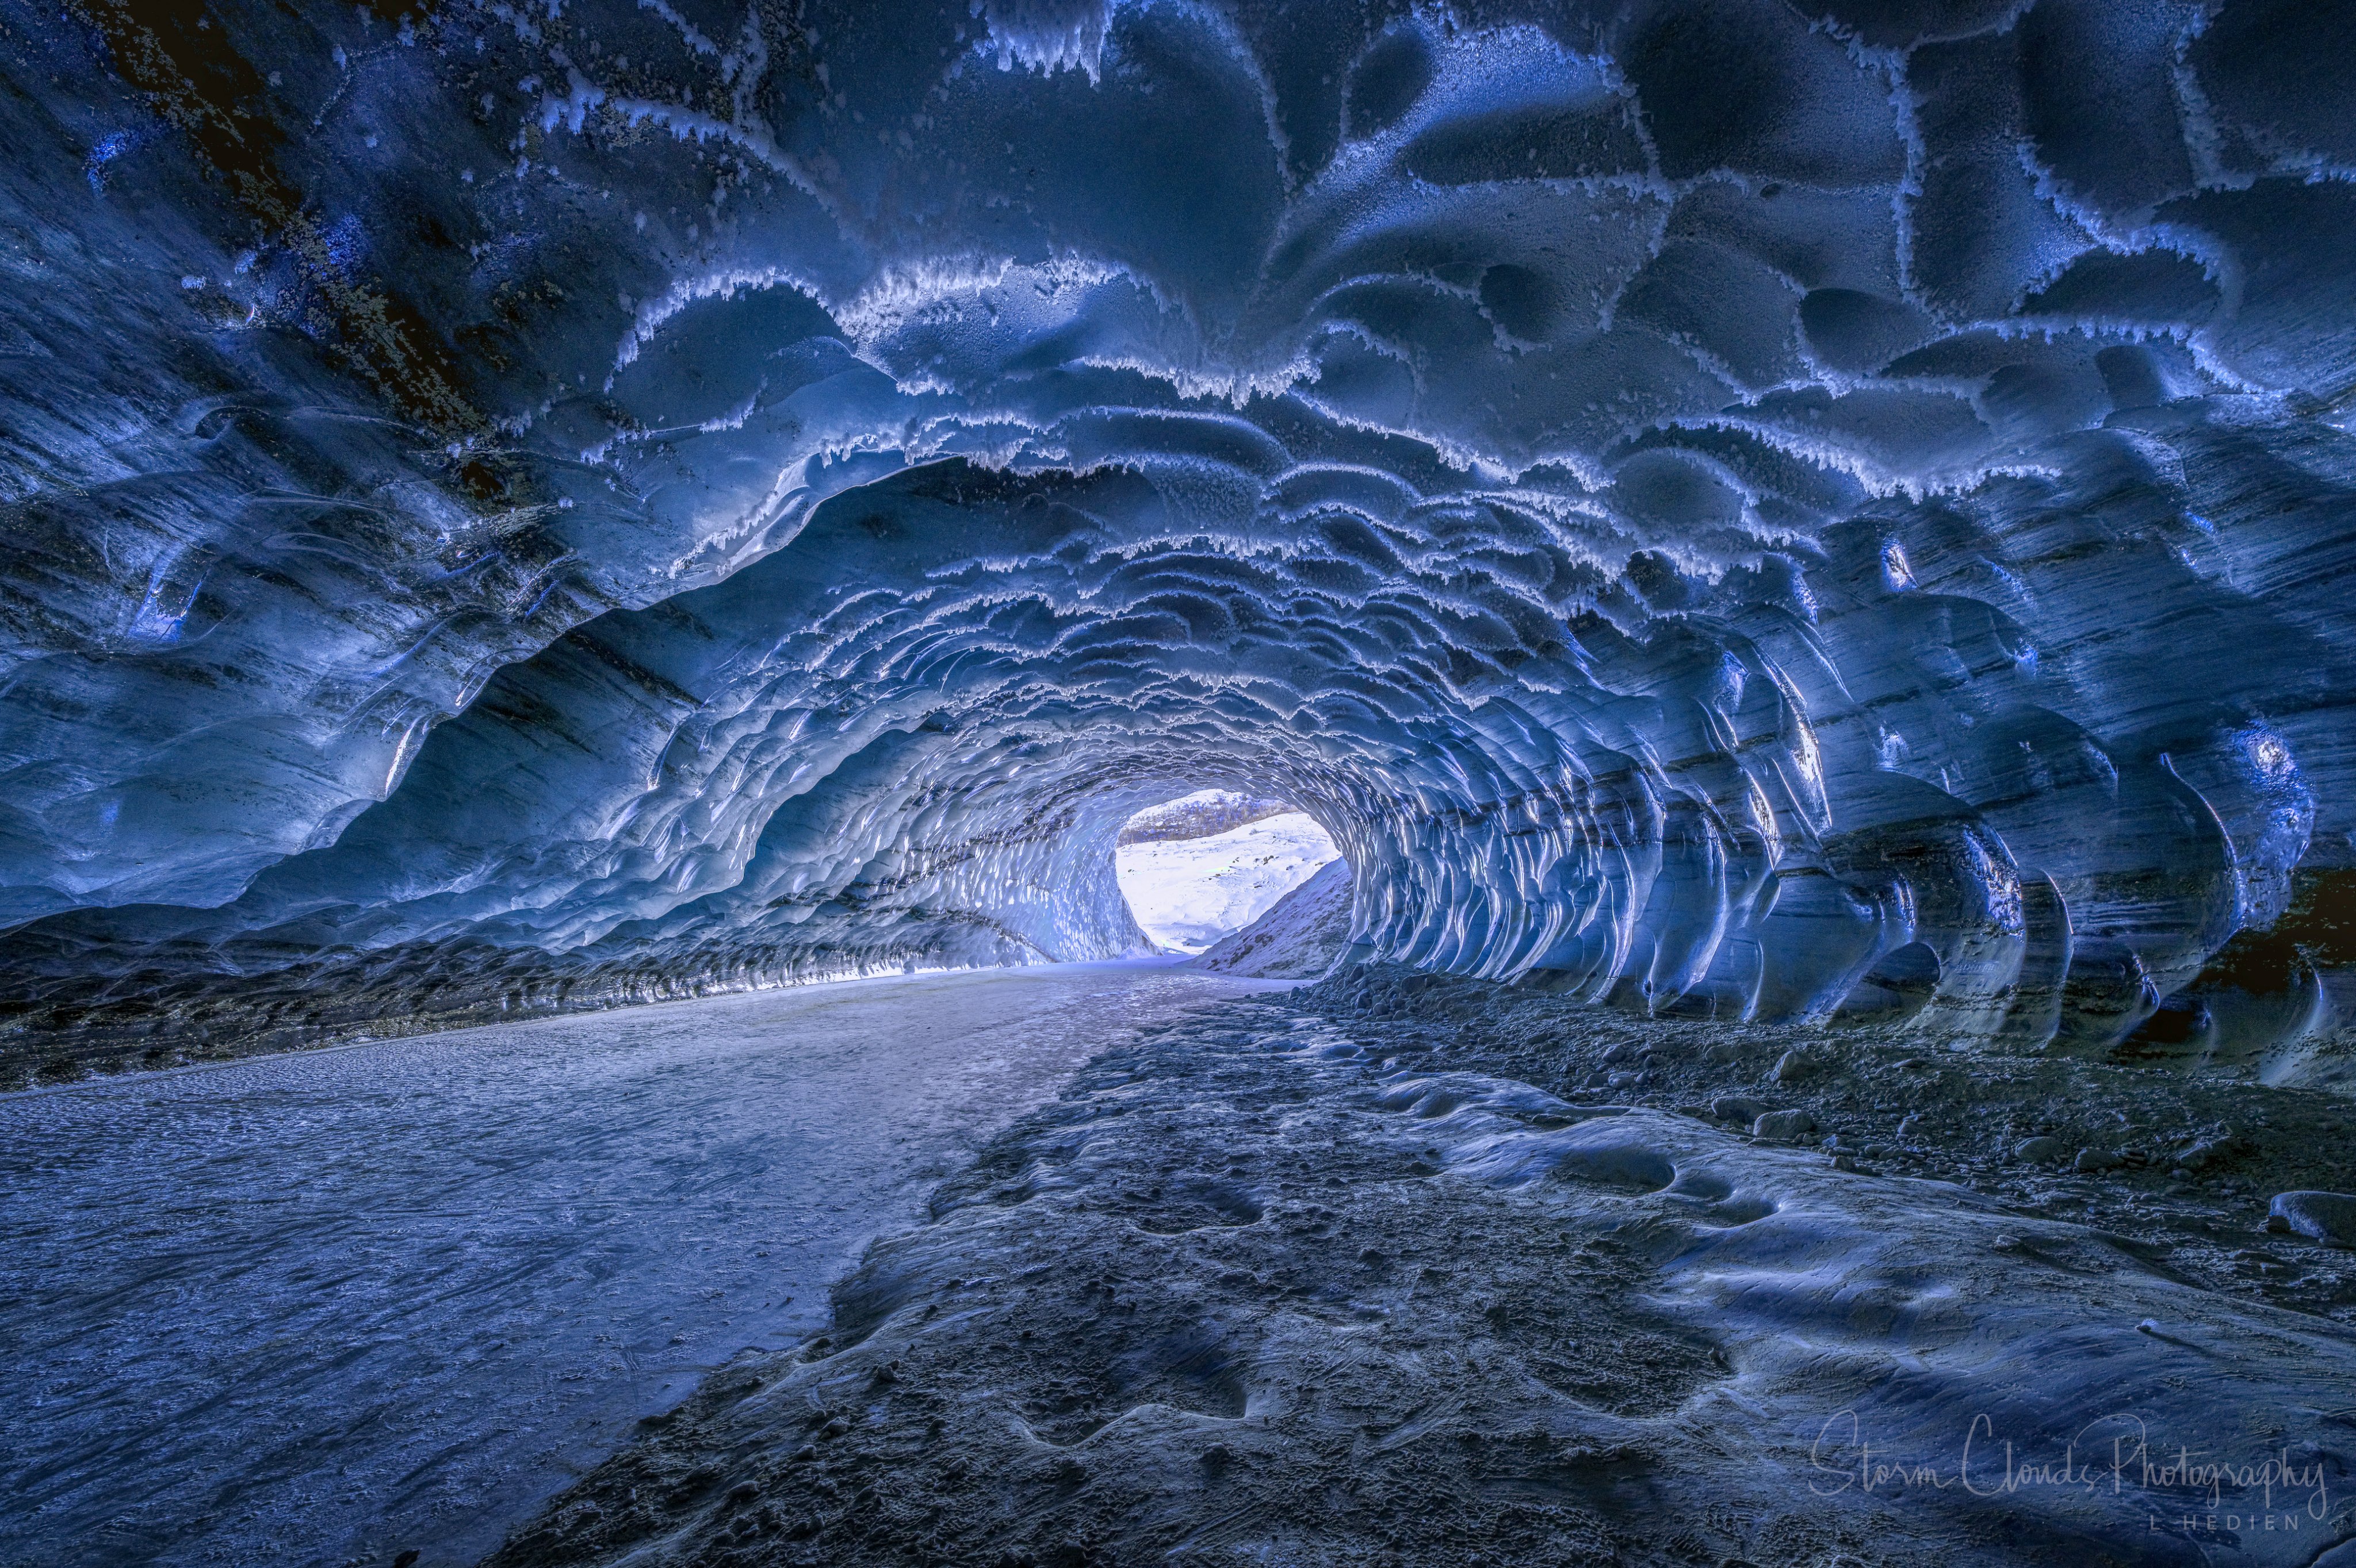 3rd Place An ice cave outside Fairbanks, Alaska by Laura Hedien @lhedien